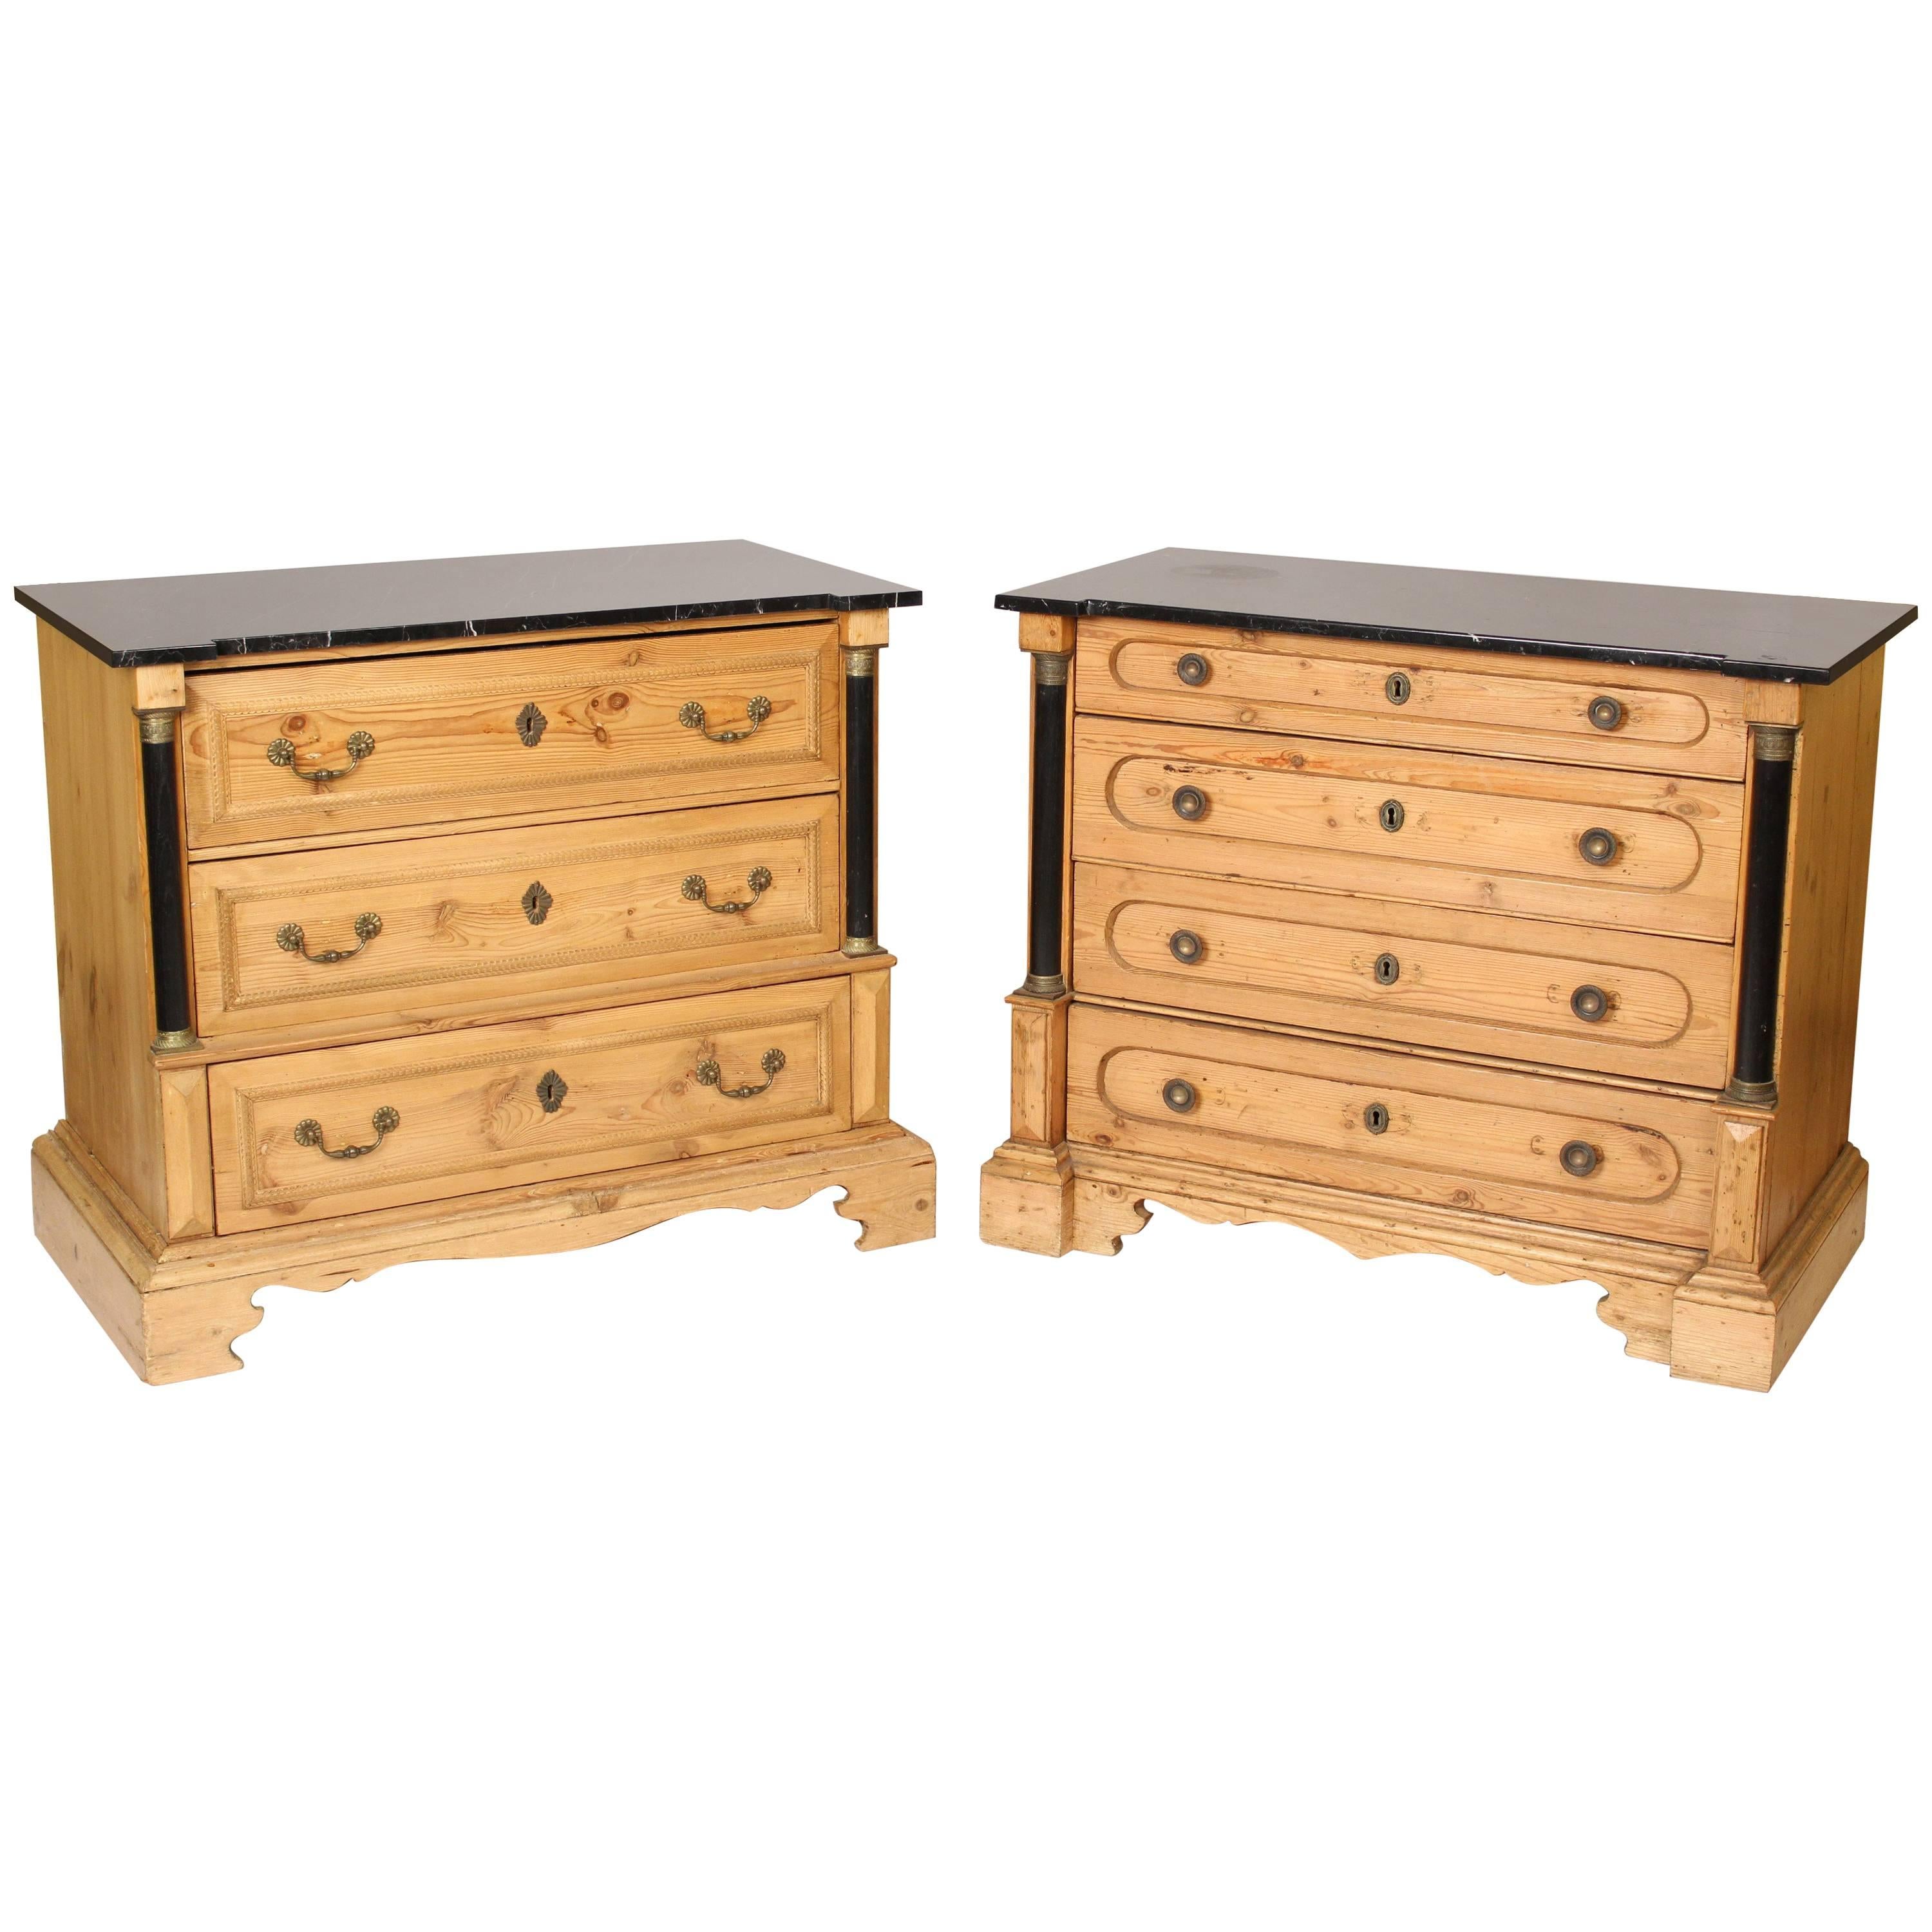 Matched Pair of Biedermeier Style Commodes